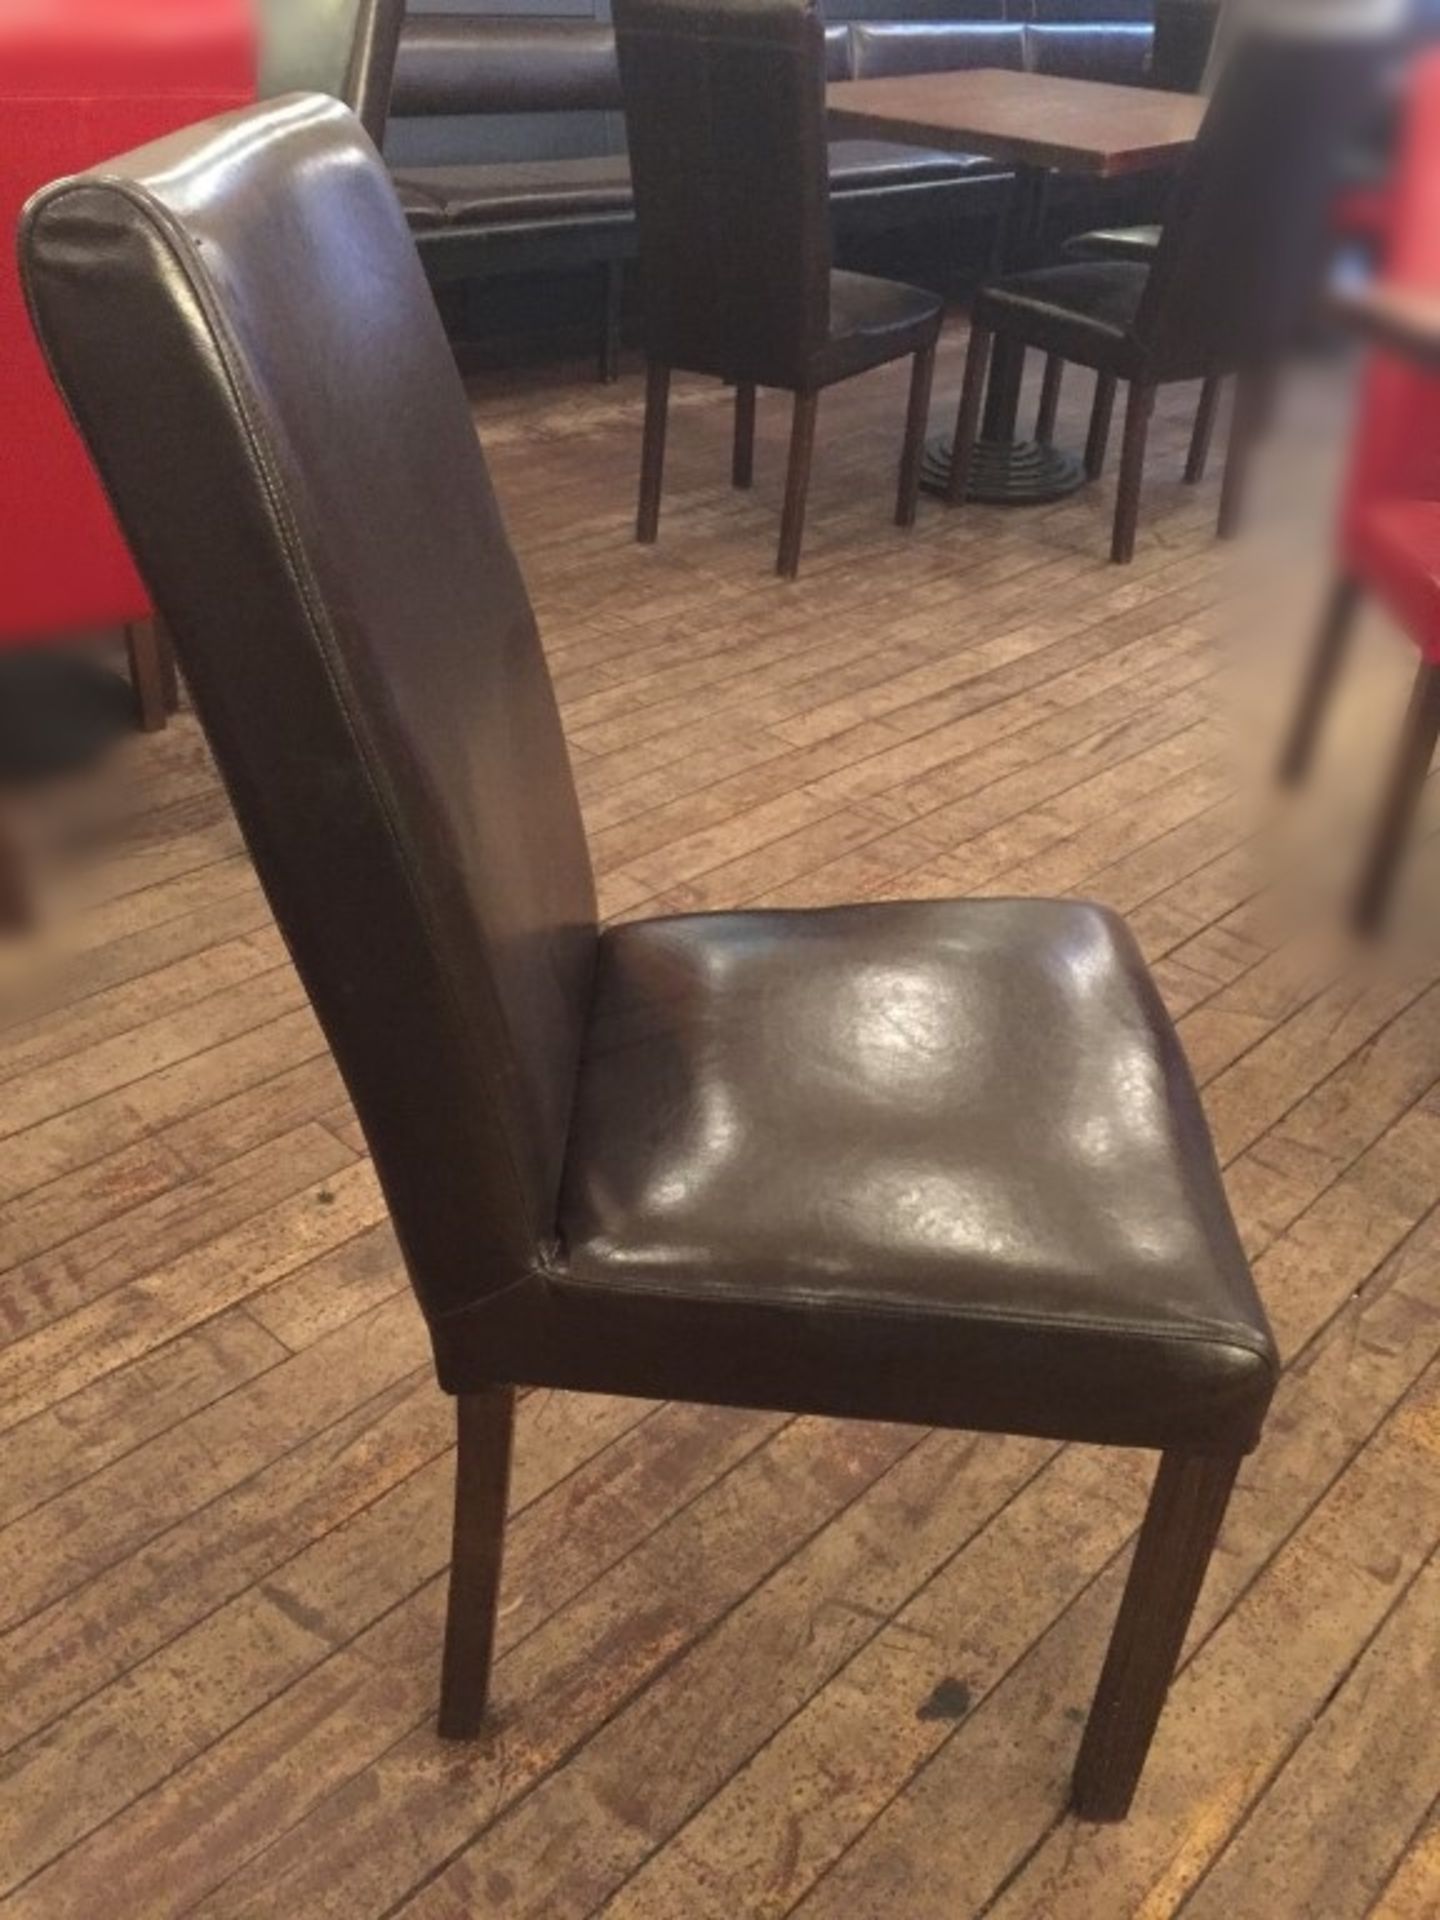 4 x Brown Faux Leather Dining Chairs - Seating Dimensions: 47 x 38cm x Height 100cm, Seat Height - Image 3 of 5